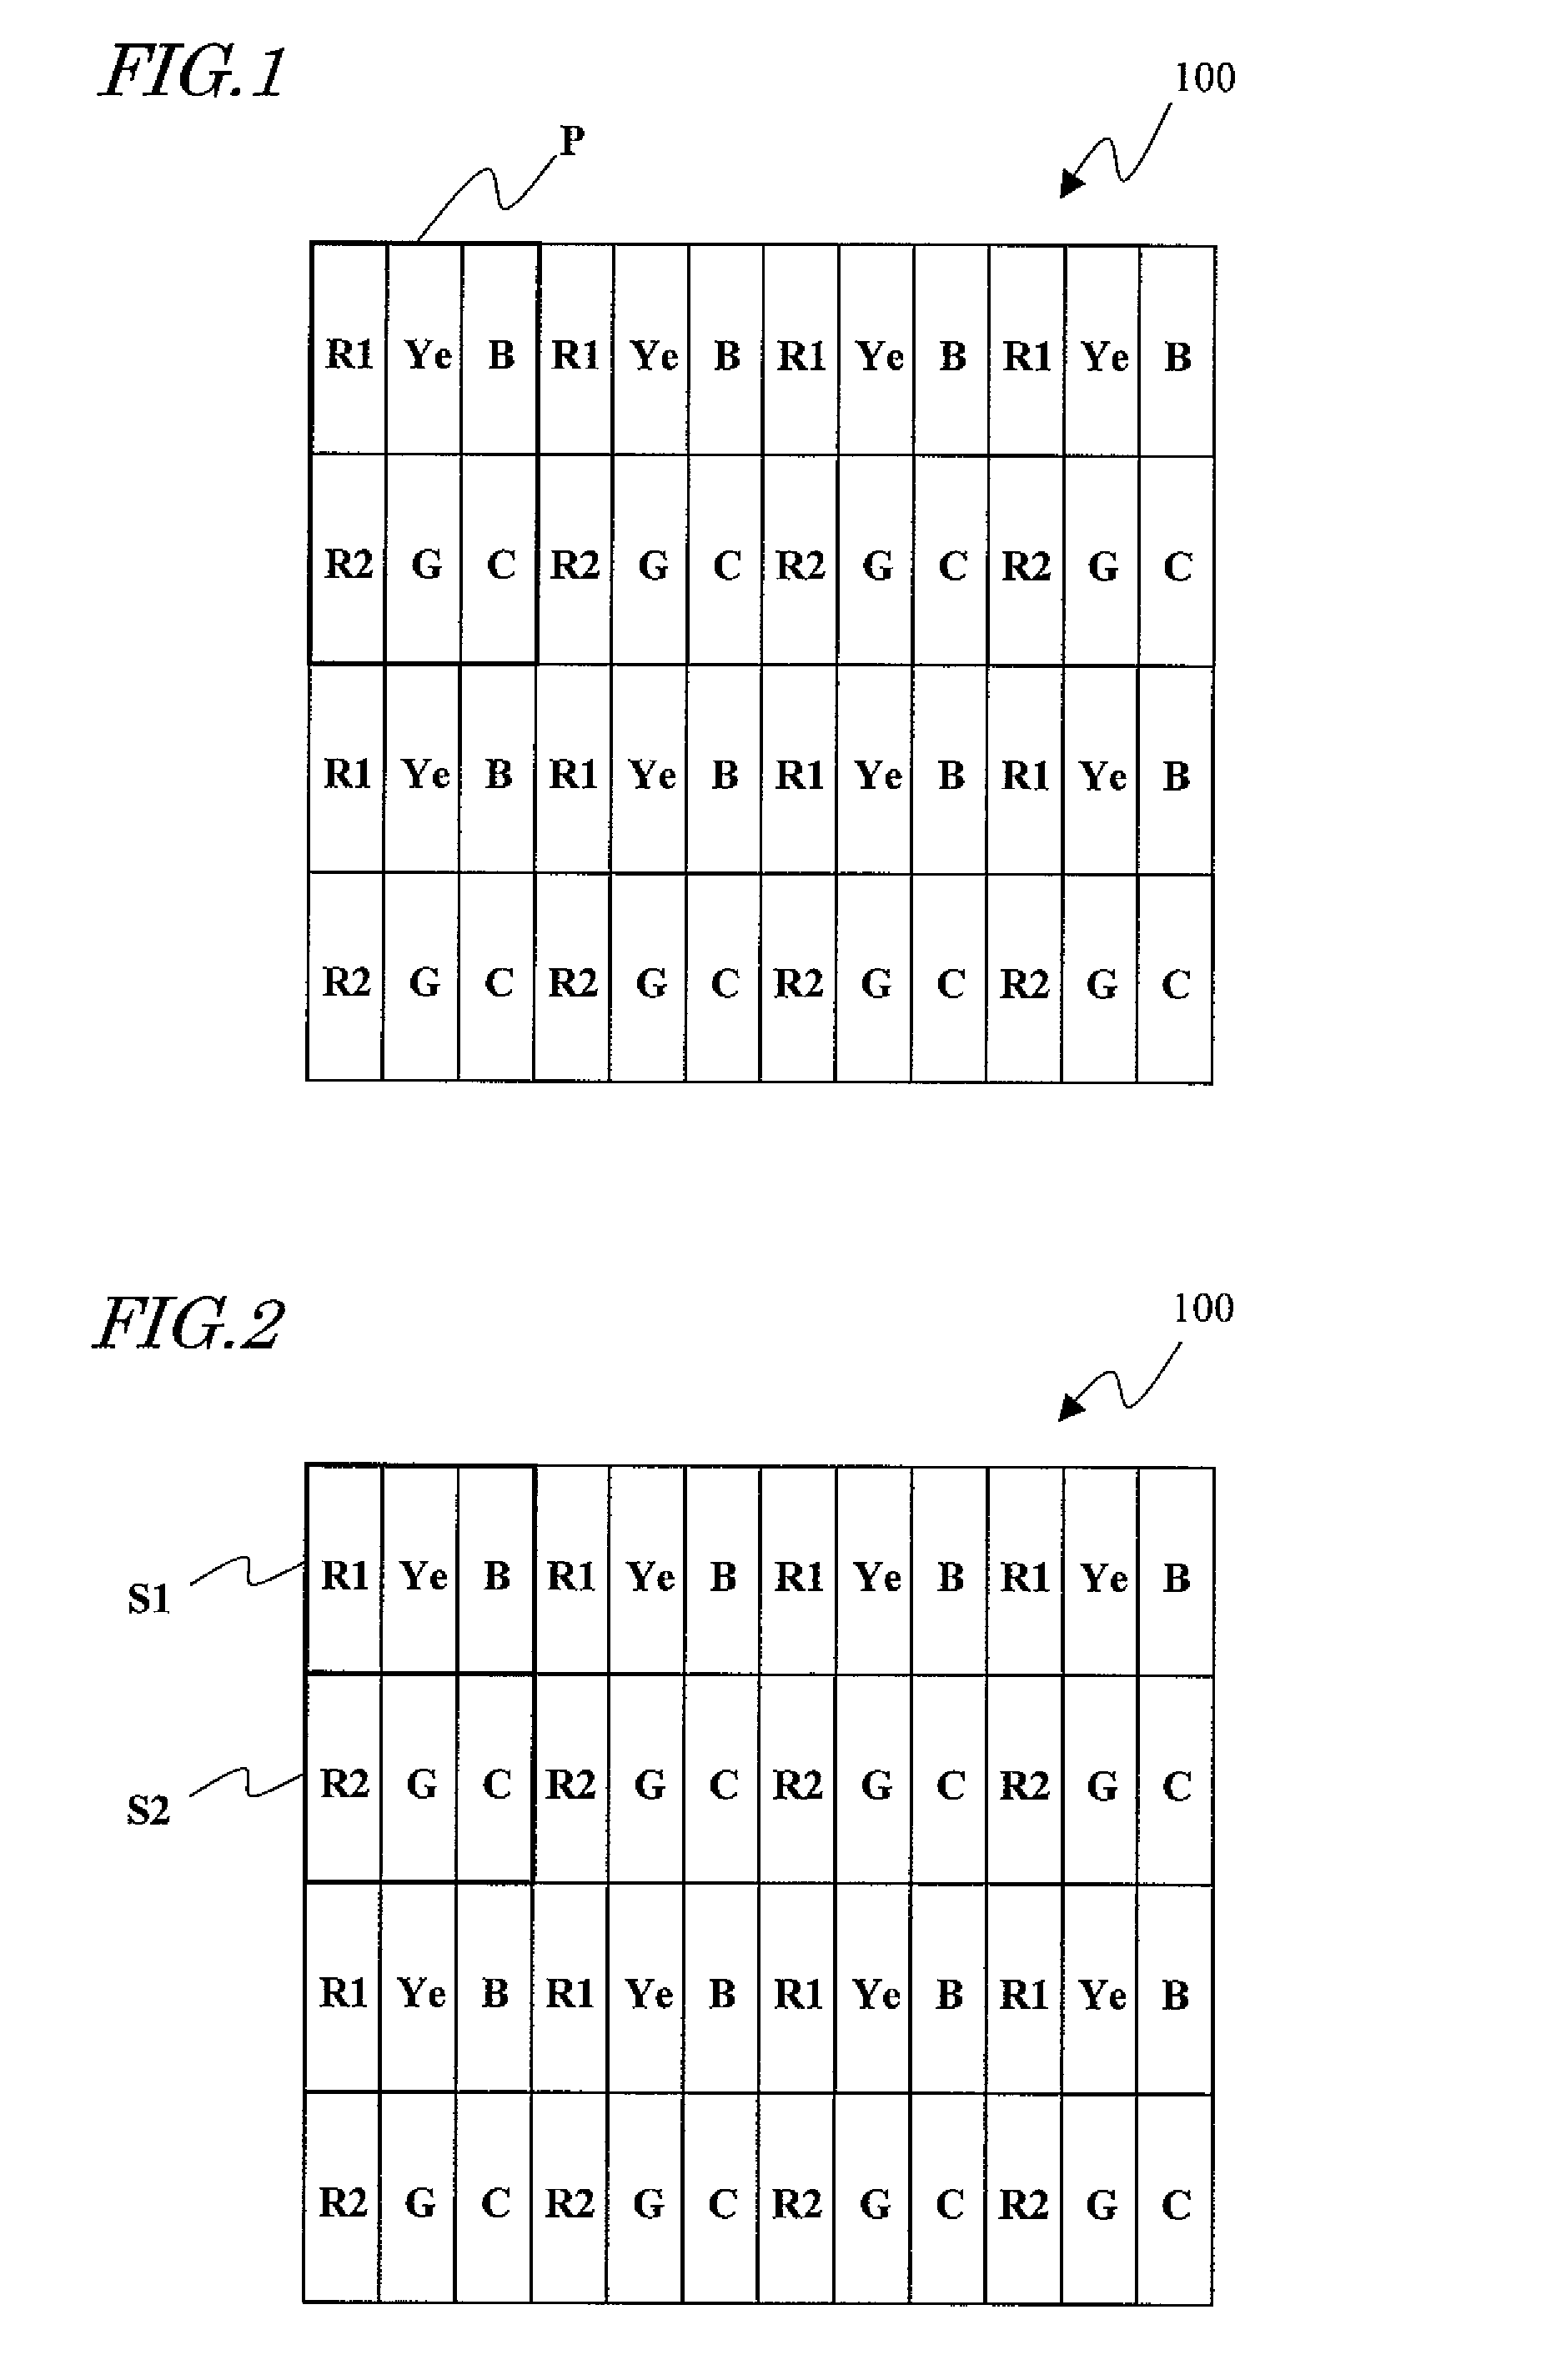 Multiple-primary-color liquid crystal display device